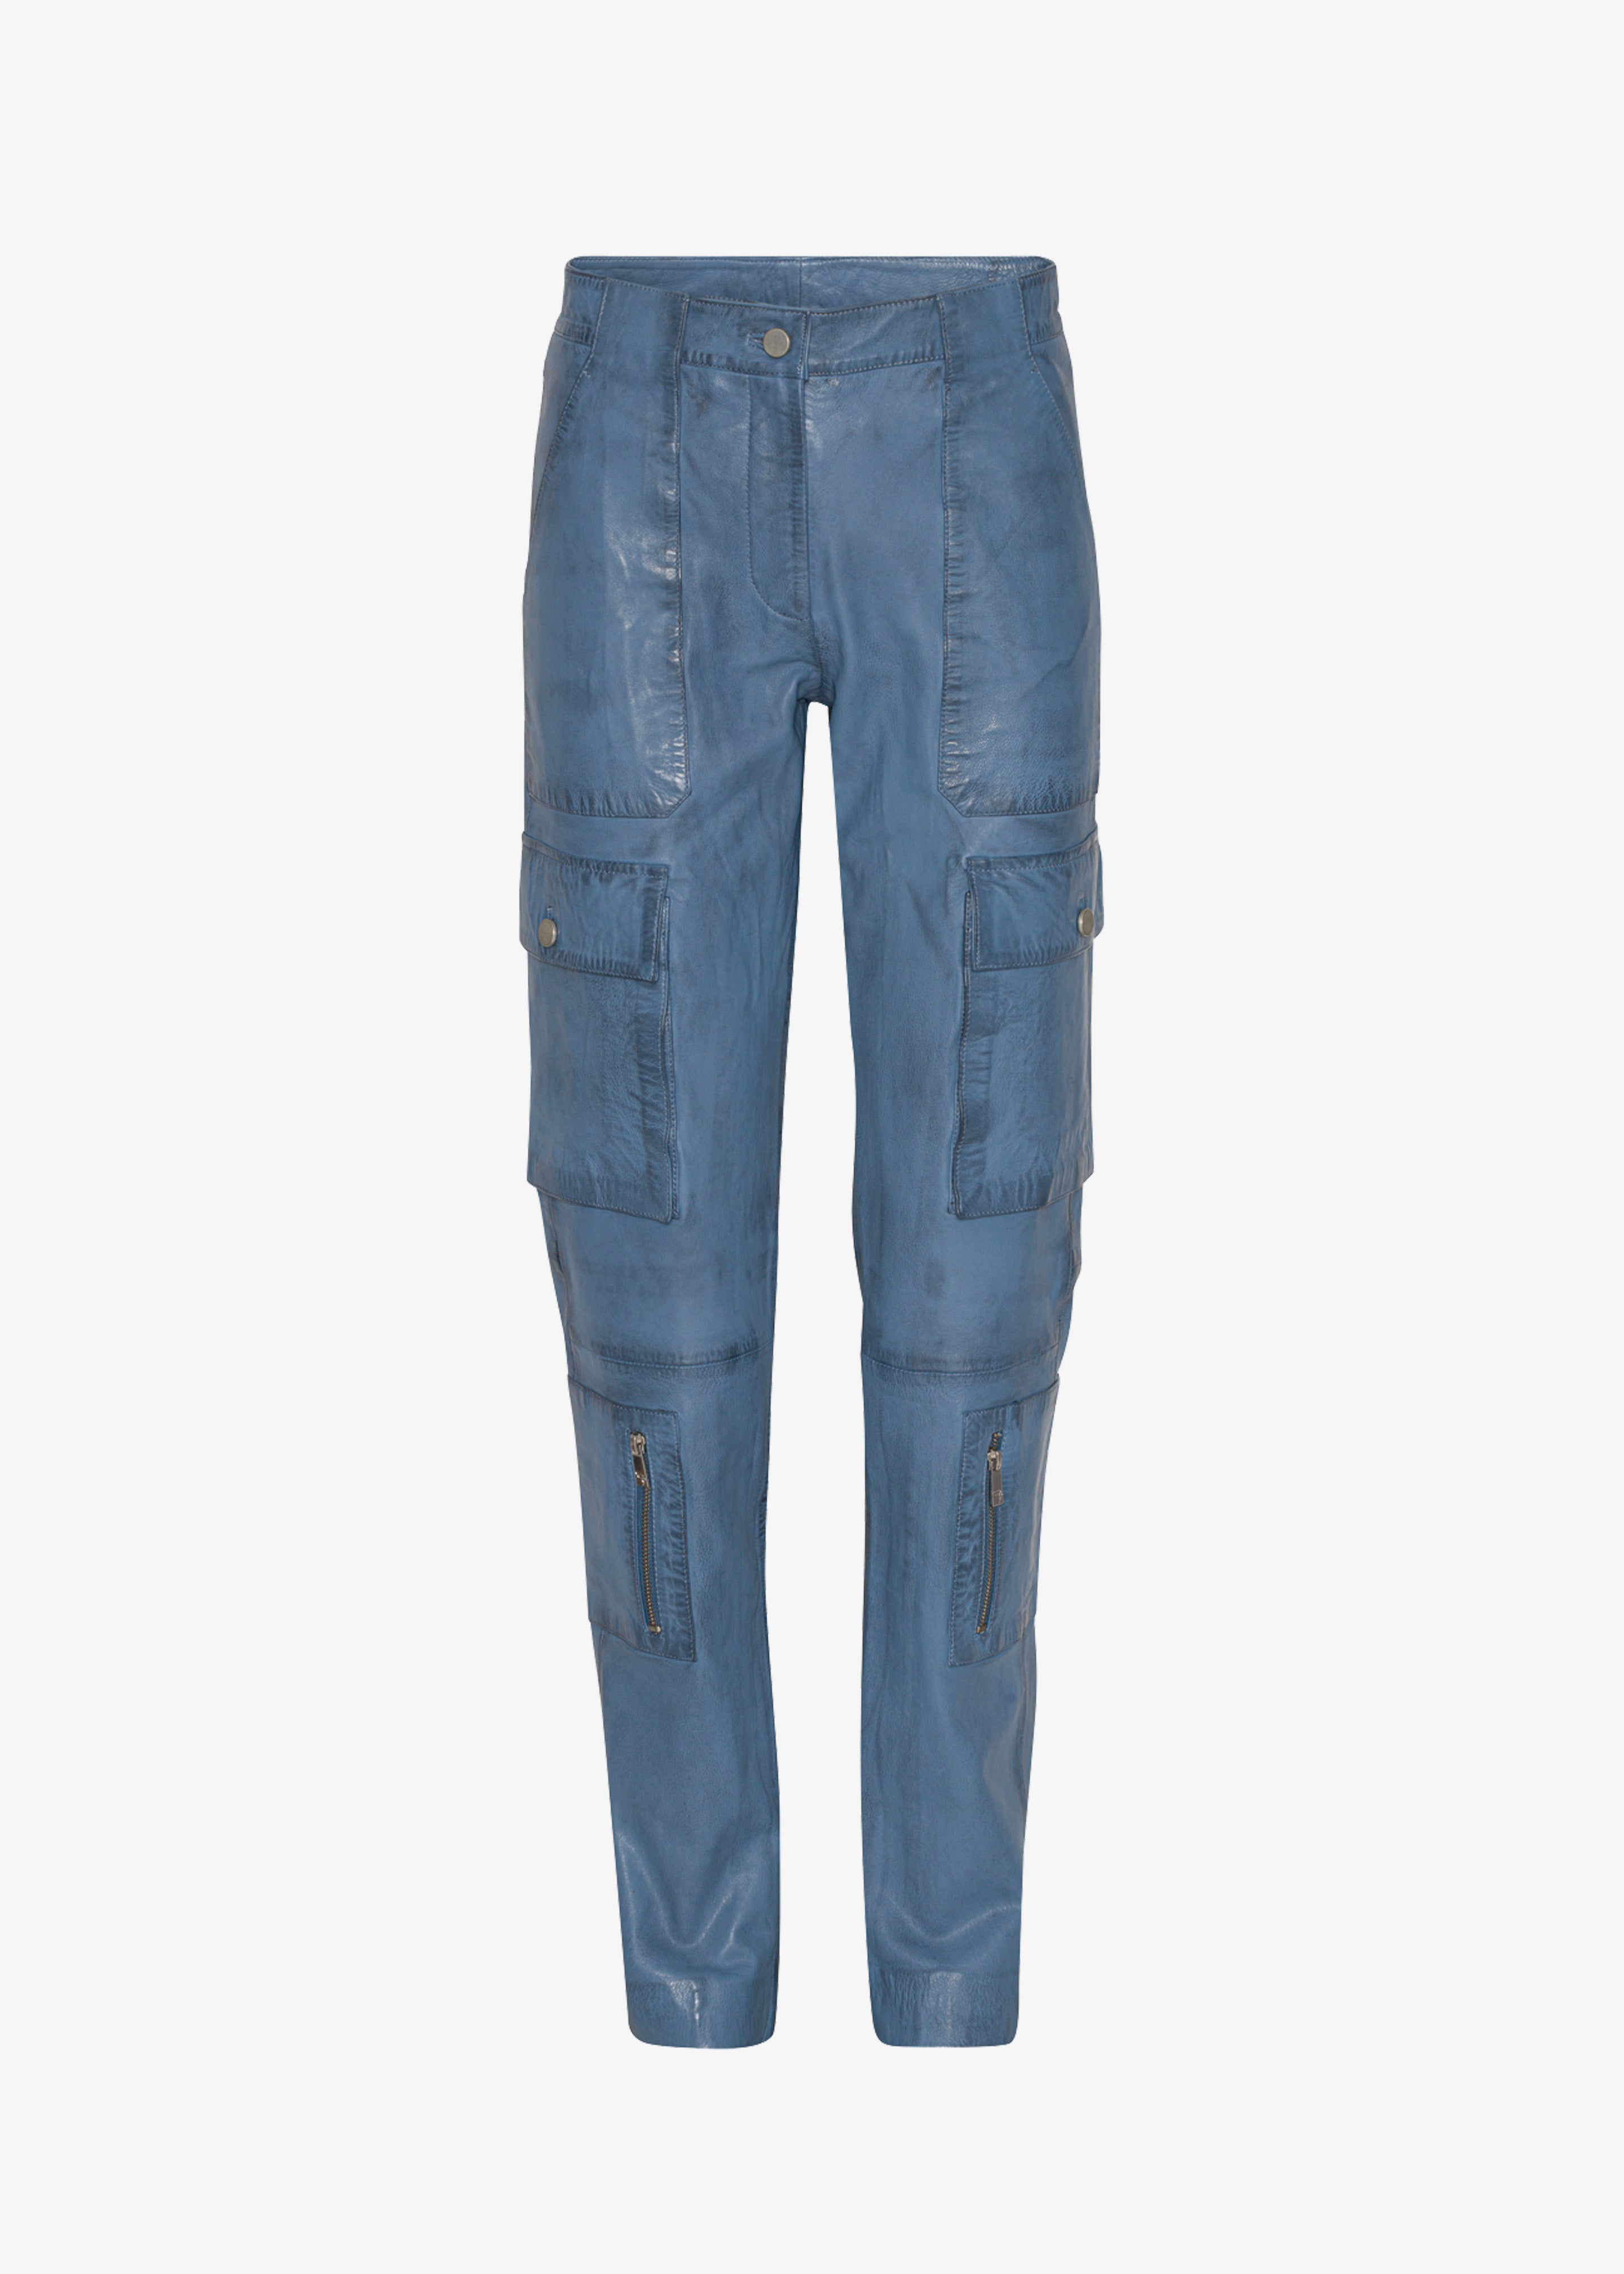 REMAIN Leather Fitted Pants - Coronet Blue - 4